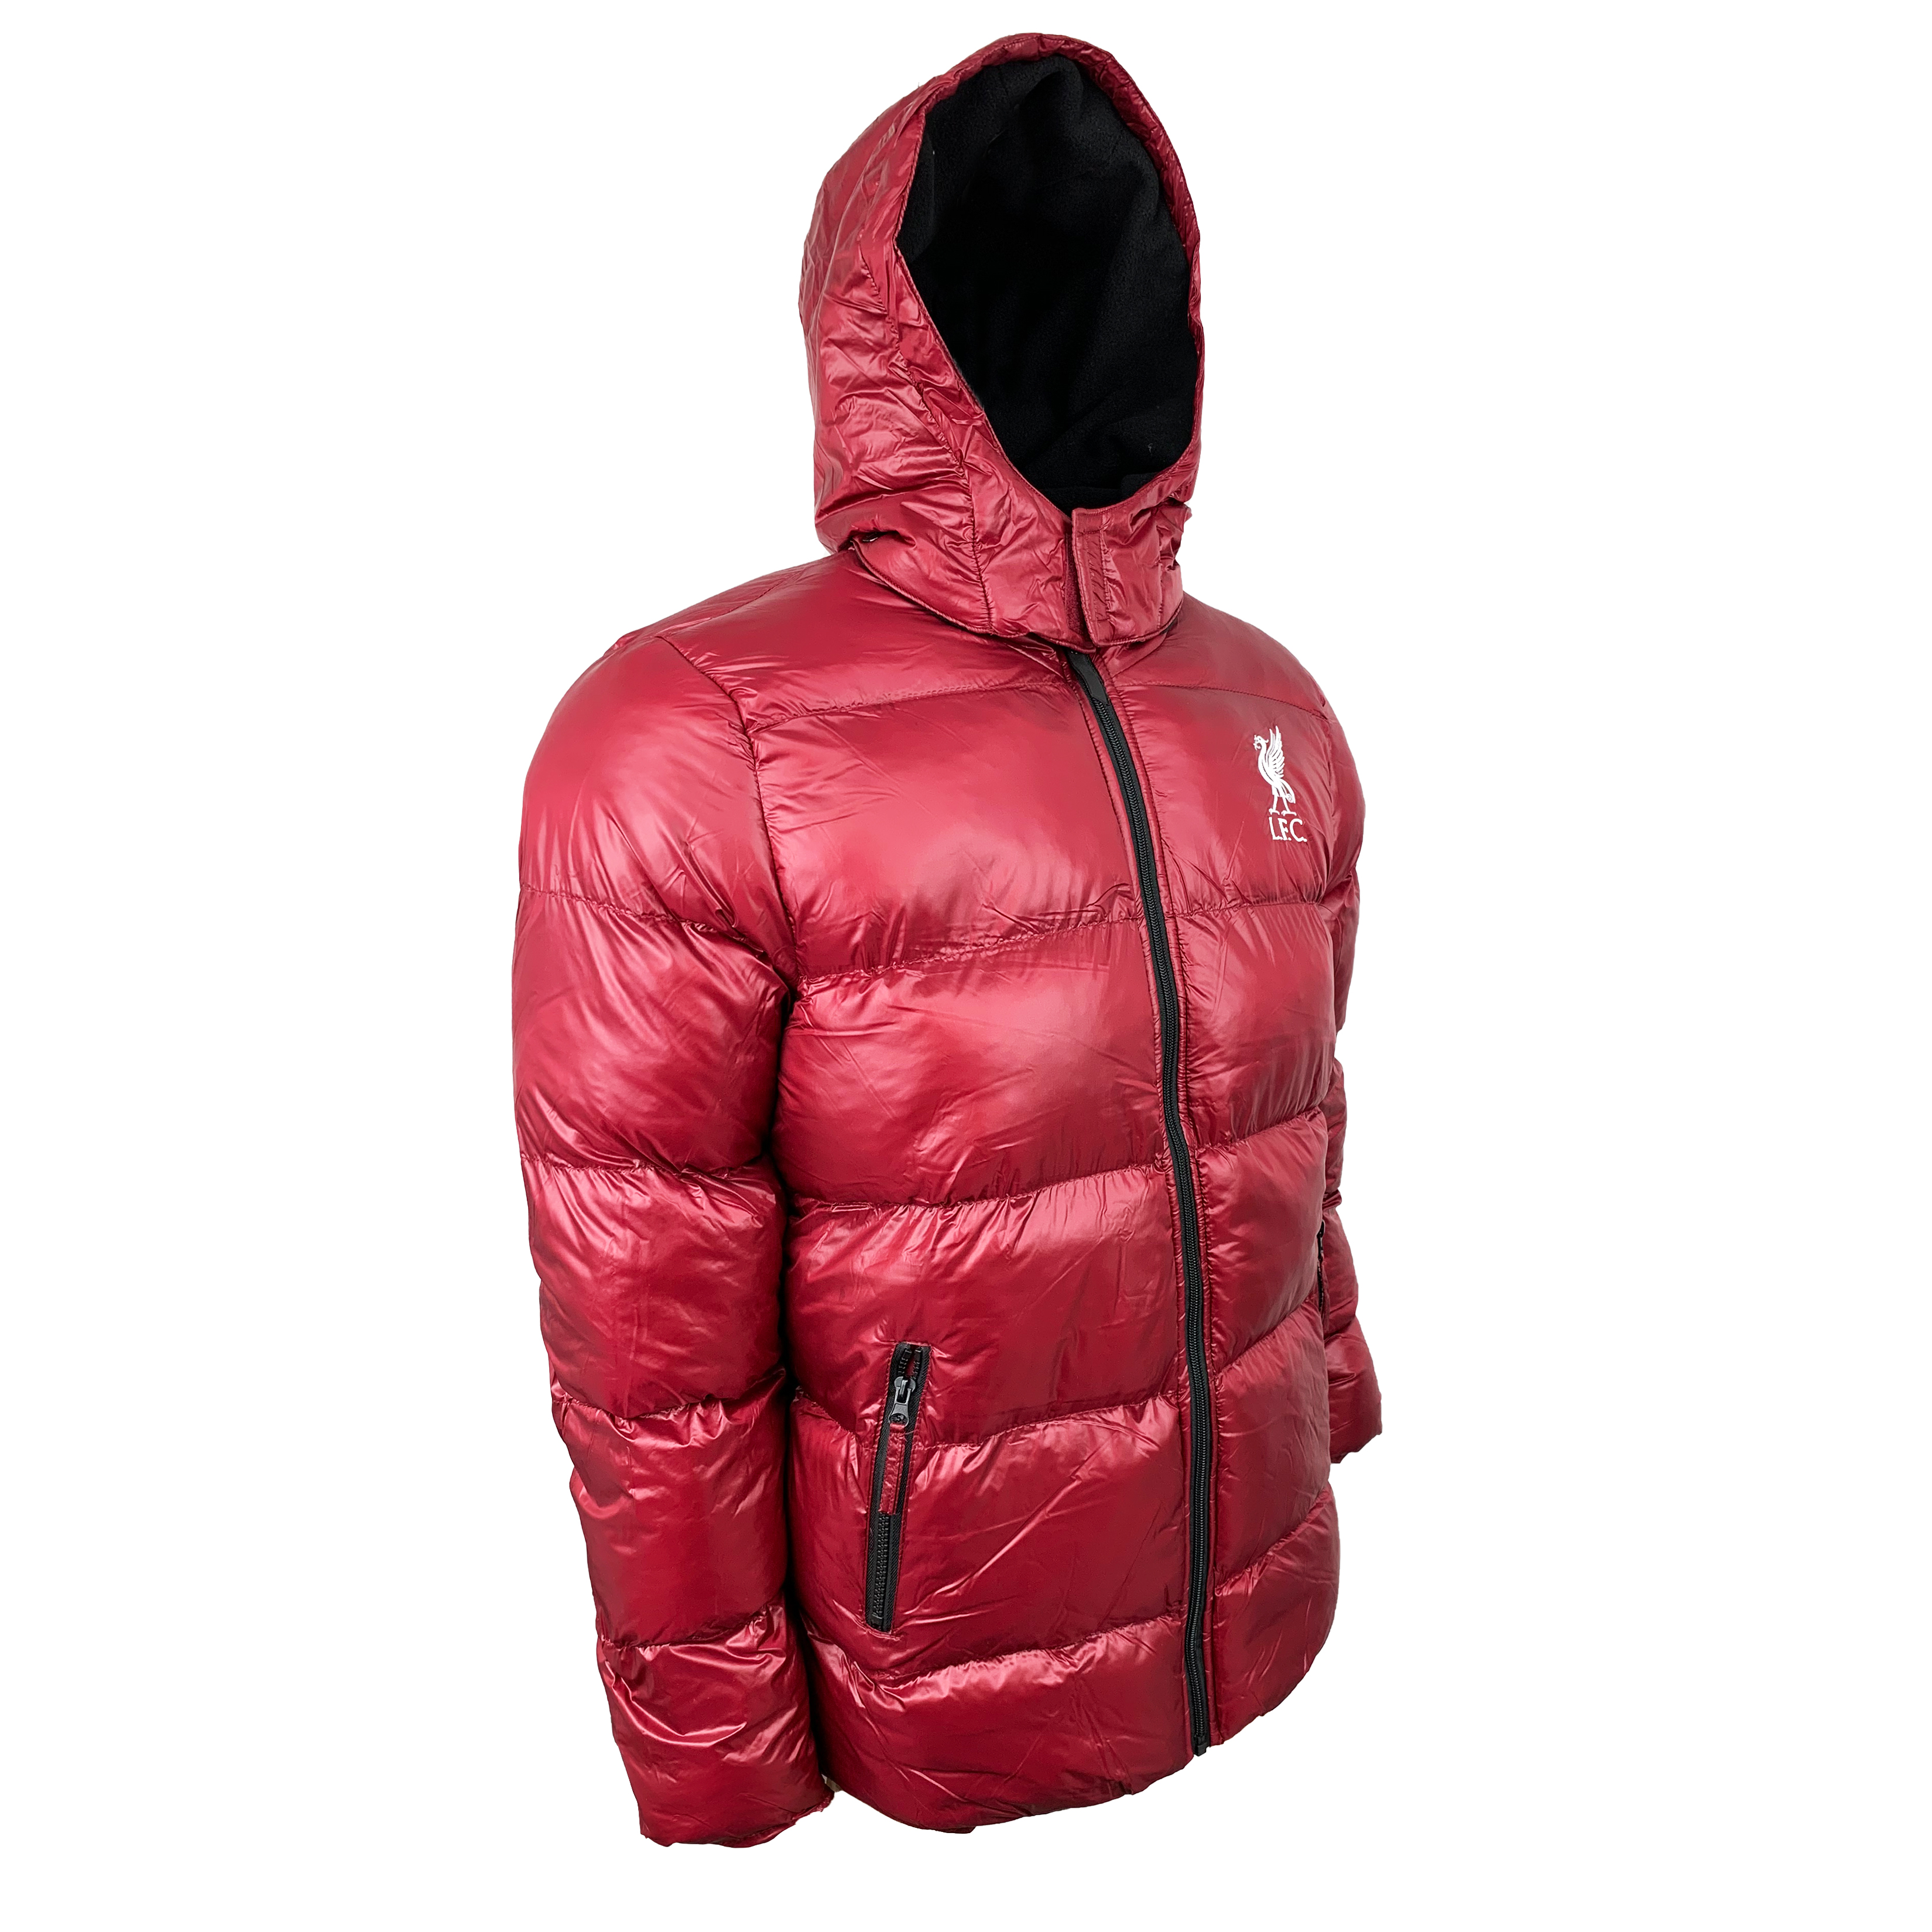 Liverpool Winter Jacket, With Removable Hood, Licensed Liverpool Puffer Jacket (YL) - image 2 of 5